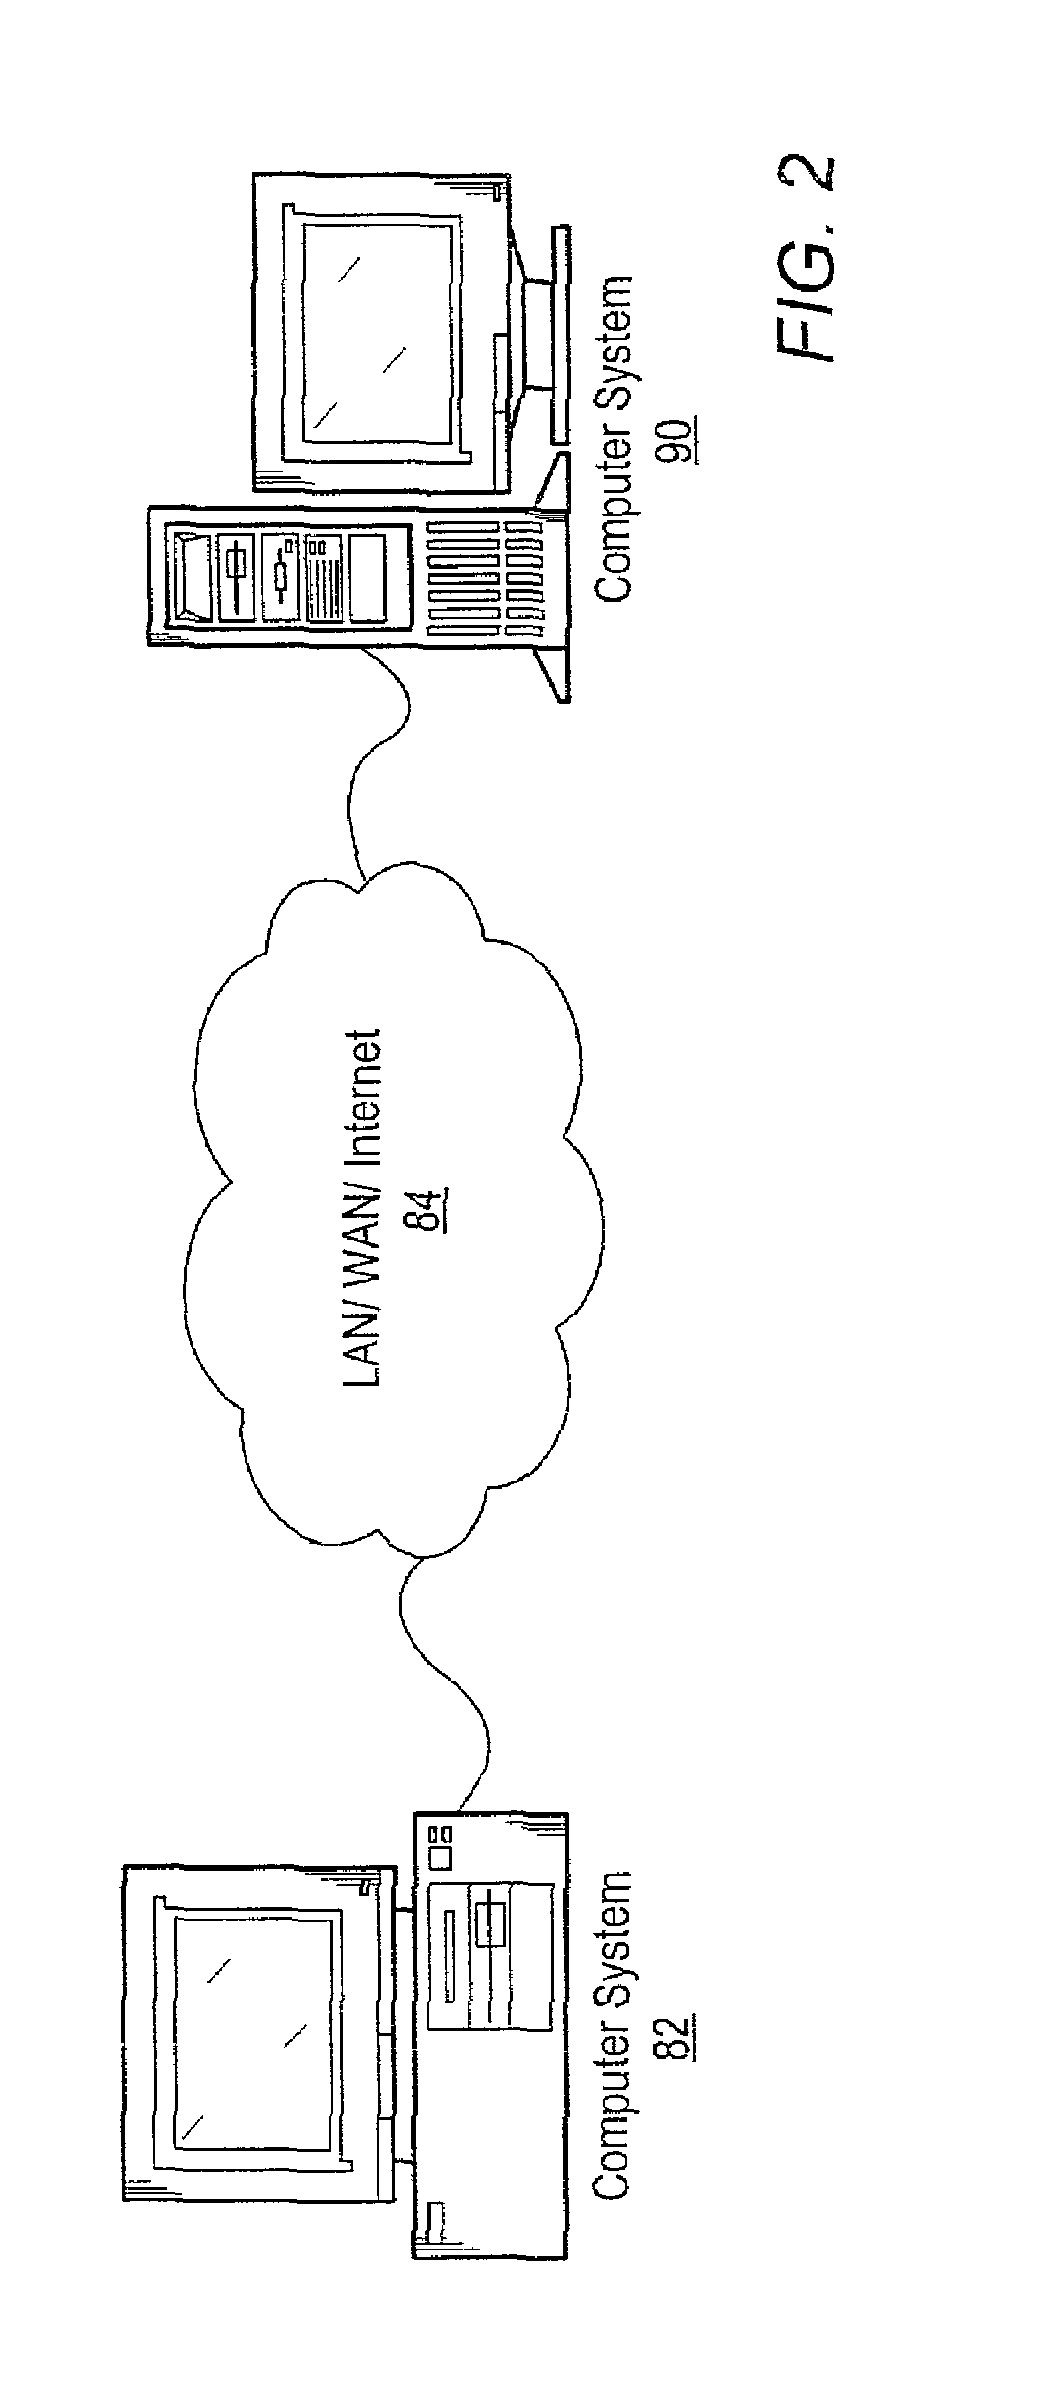 System and method for analyzing a graphical program using debugging graphical programs